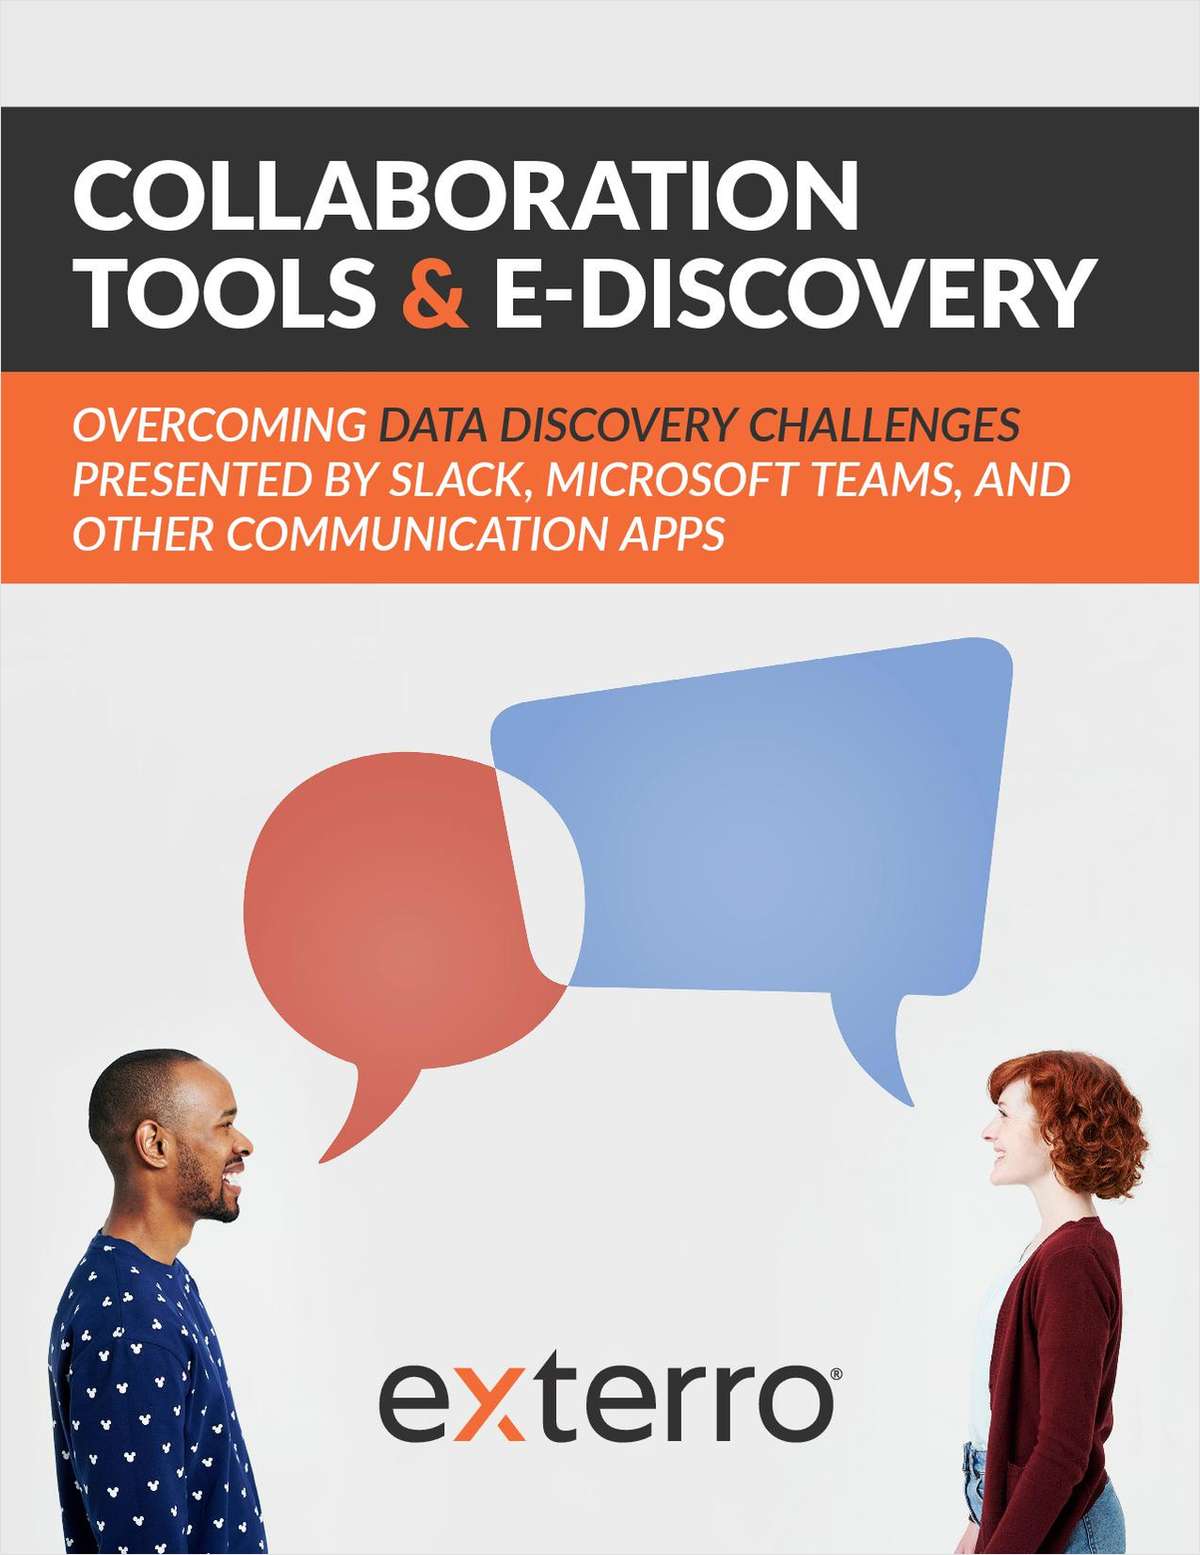 Collaboration Tools & E-Discovery: Overcoming Data Discovery Challenges